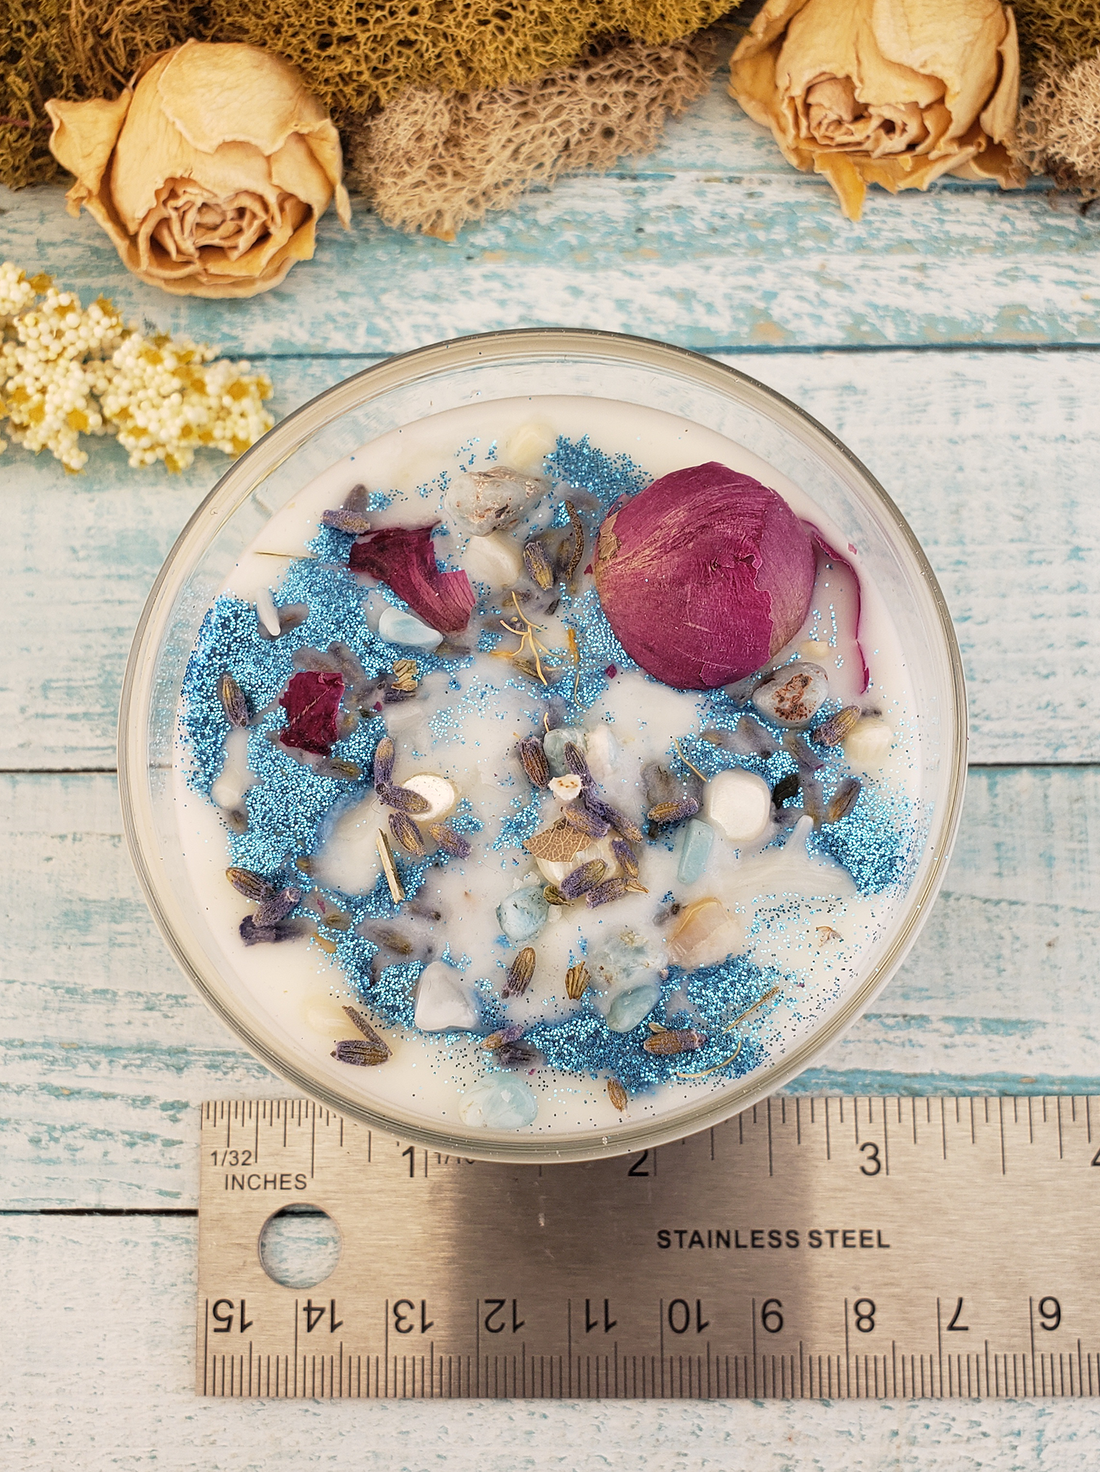 Pure Blessings - Coconut Soy Wax Handmade Scented Tumbler Candle - Scented with Essential Oils - Crystal Chips and Dried Herbs - Larimar Mother of Pearl and White Bamboo Fossil Coral